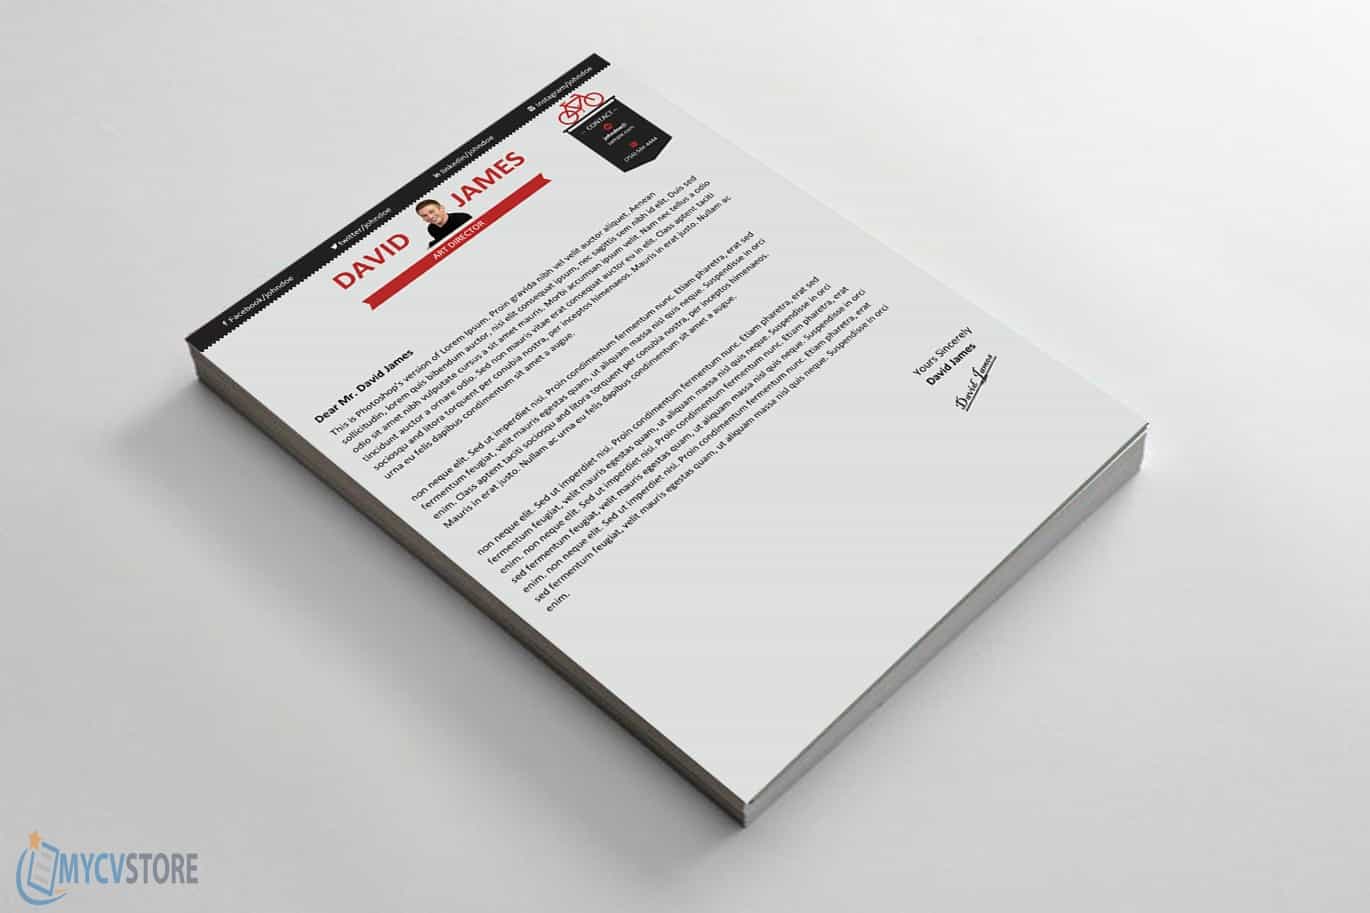 Art Director Cover Letter - Downloadable Cover Letter Template (1023 x 682 Pixel)